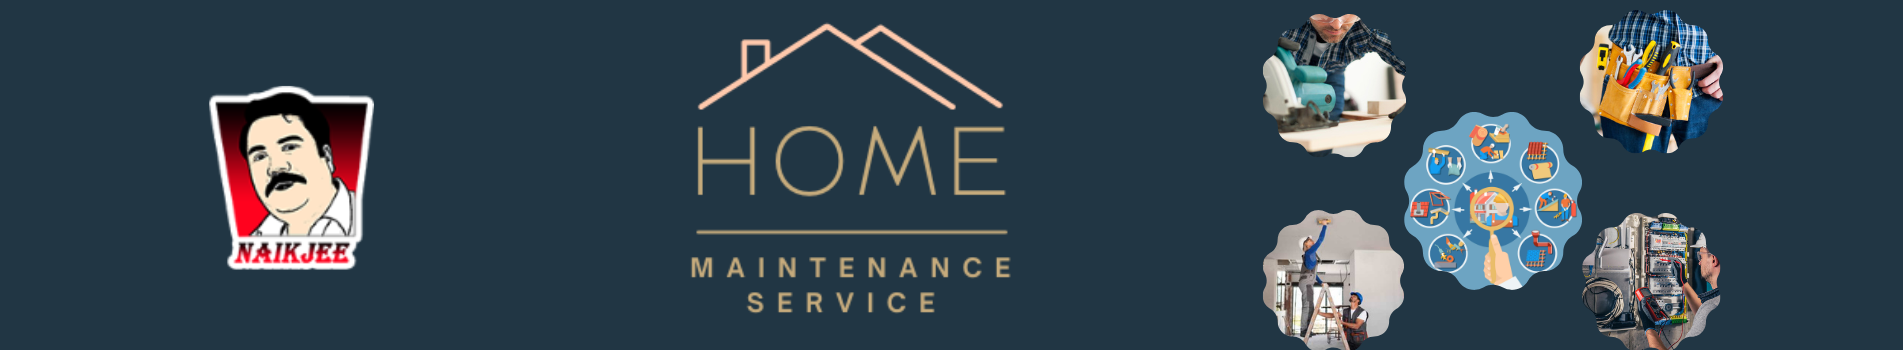 Your Trusted Partner in Home Maintenance Service in Jeddah - Naikjee